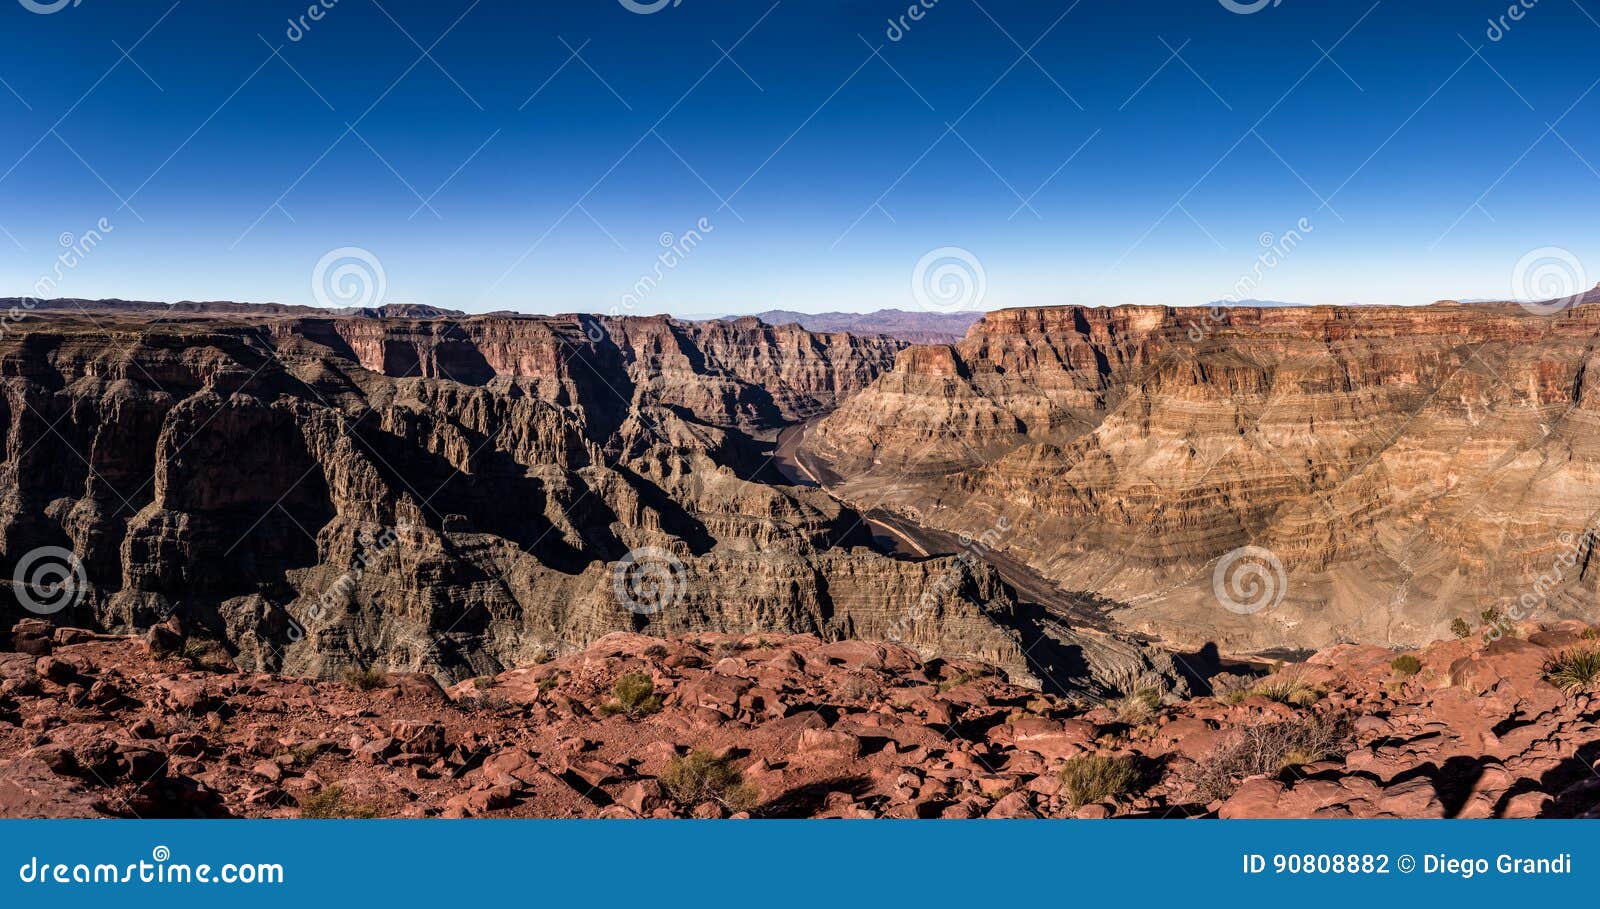 Panoramic view of Grand Canyon West Rim and Colorado River in Arizona, USA